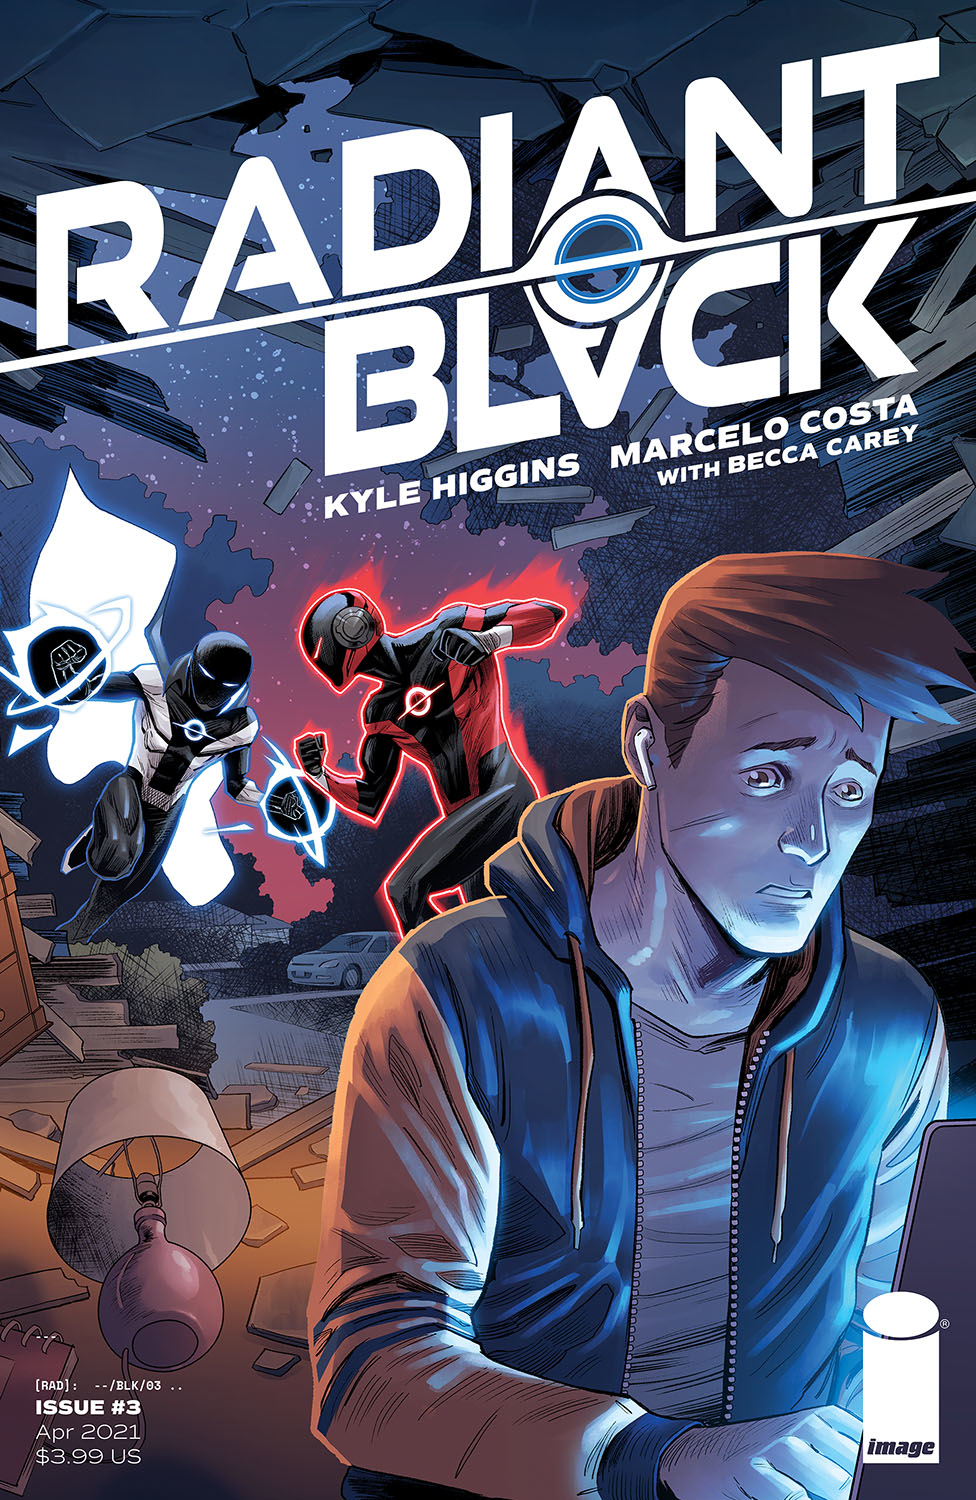 Radiant Black #3 Cover A Costa